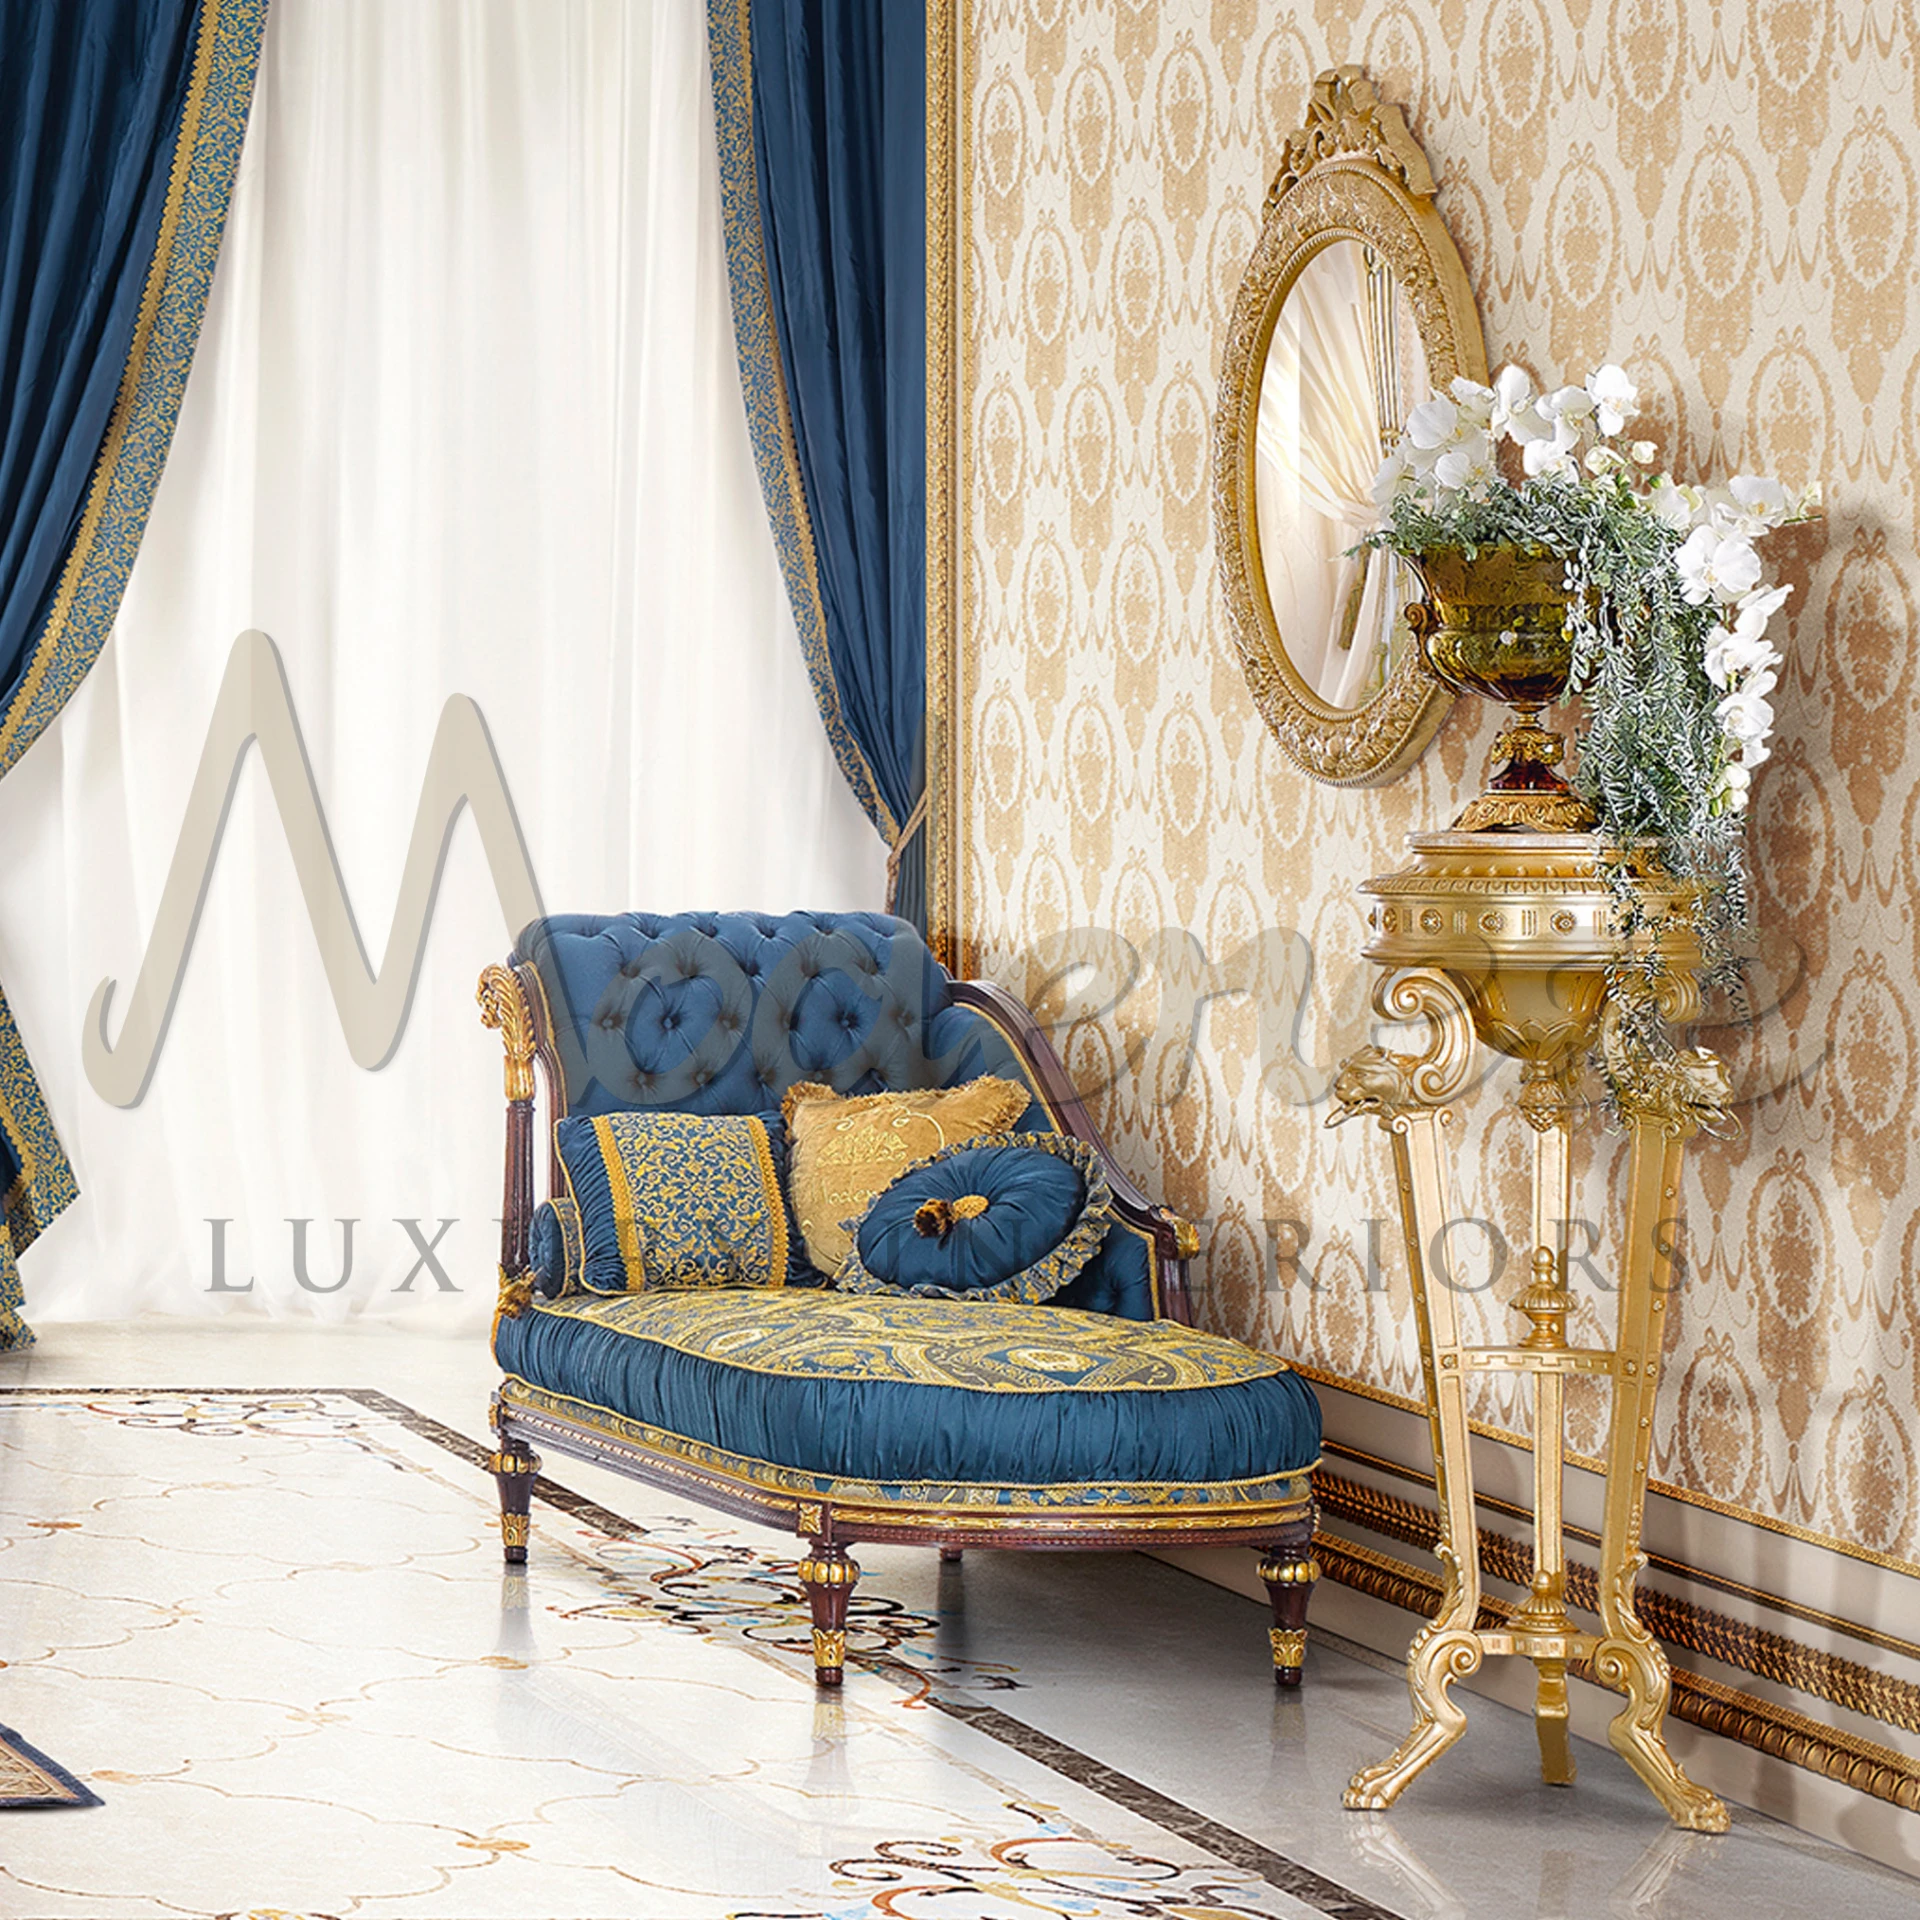 Luxurious lounging bench with deep blue tufting, gold accents, and wooden legs.                                                                                   